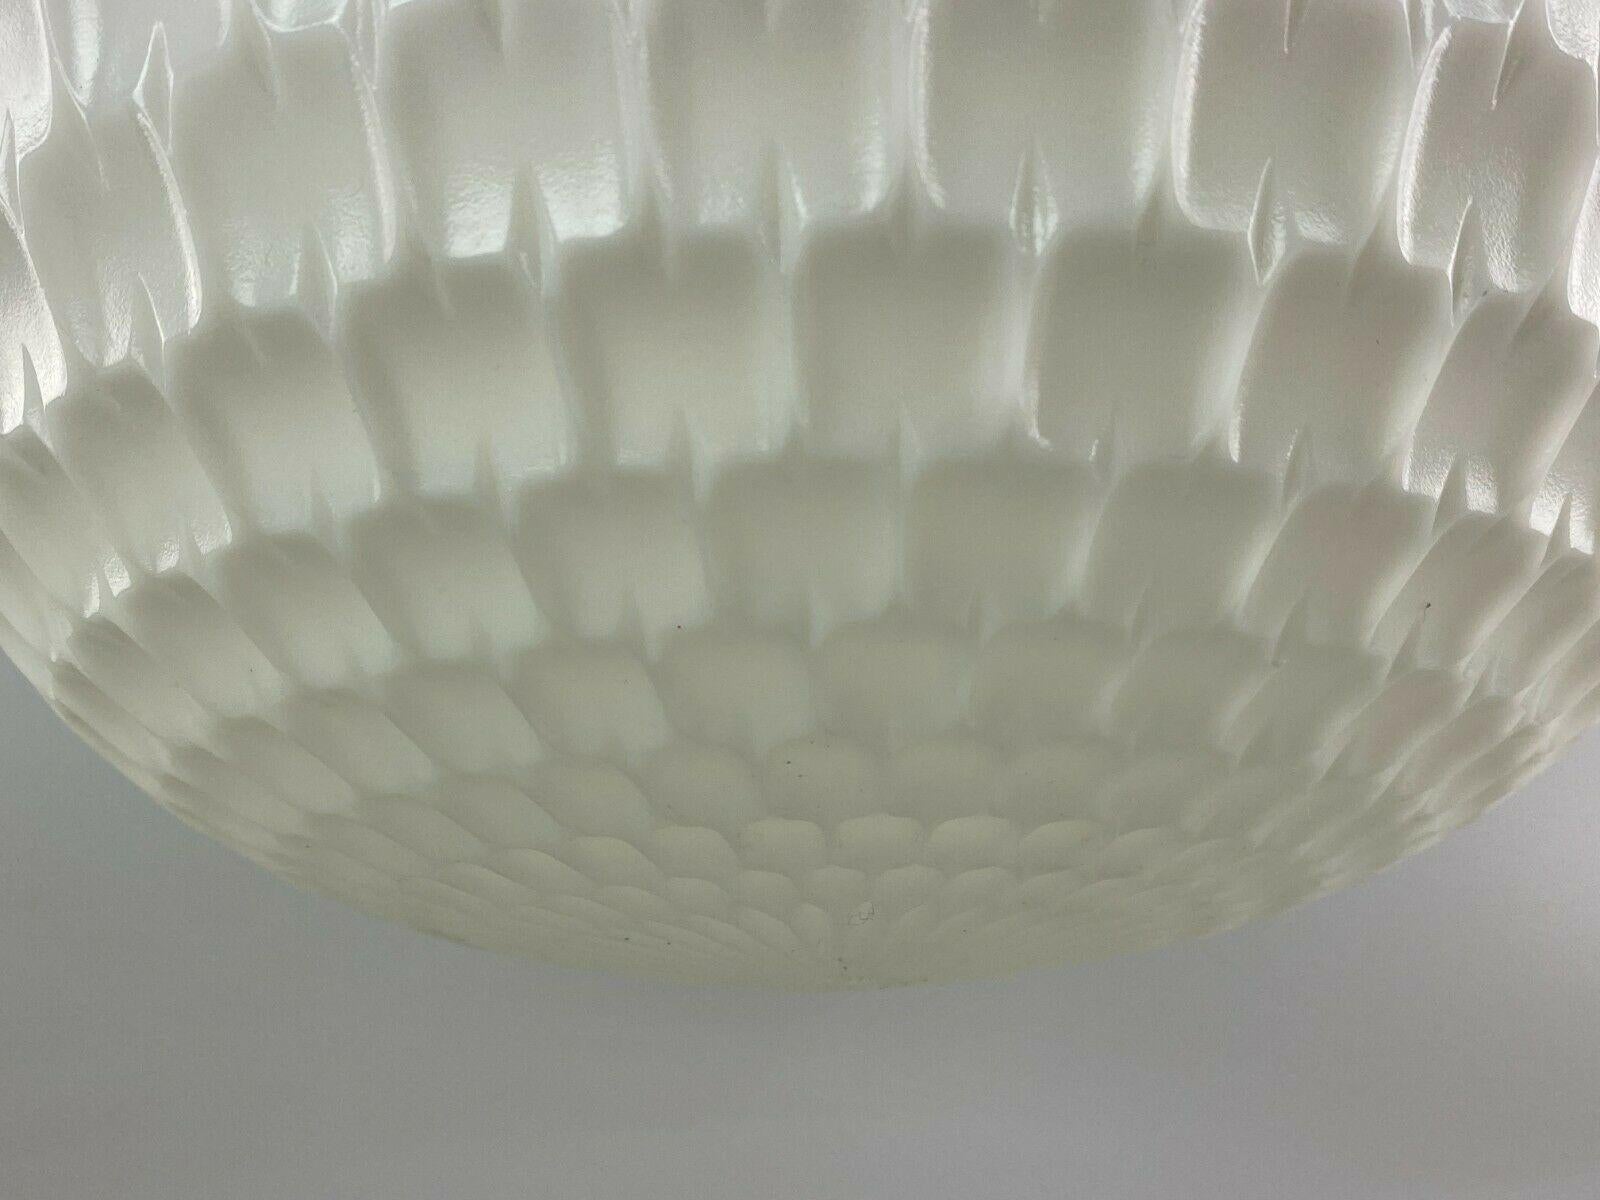 60s 70s Erco Lamp Light Honeycomb Ceiling Lamp Plastic Space Age Design For Sale 1